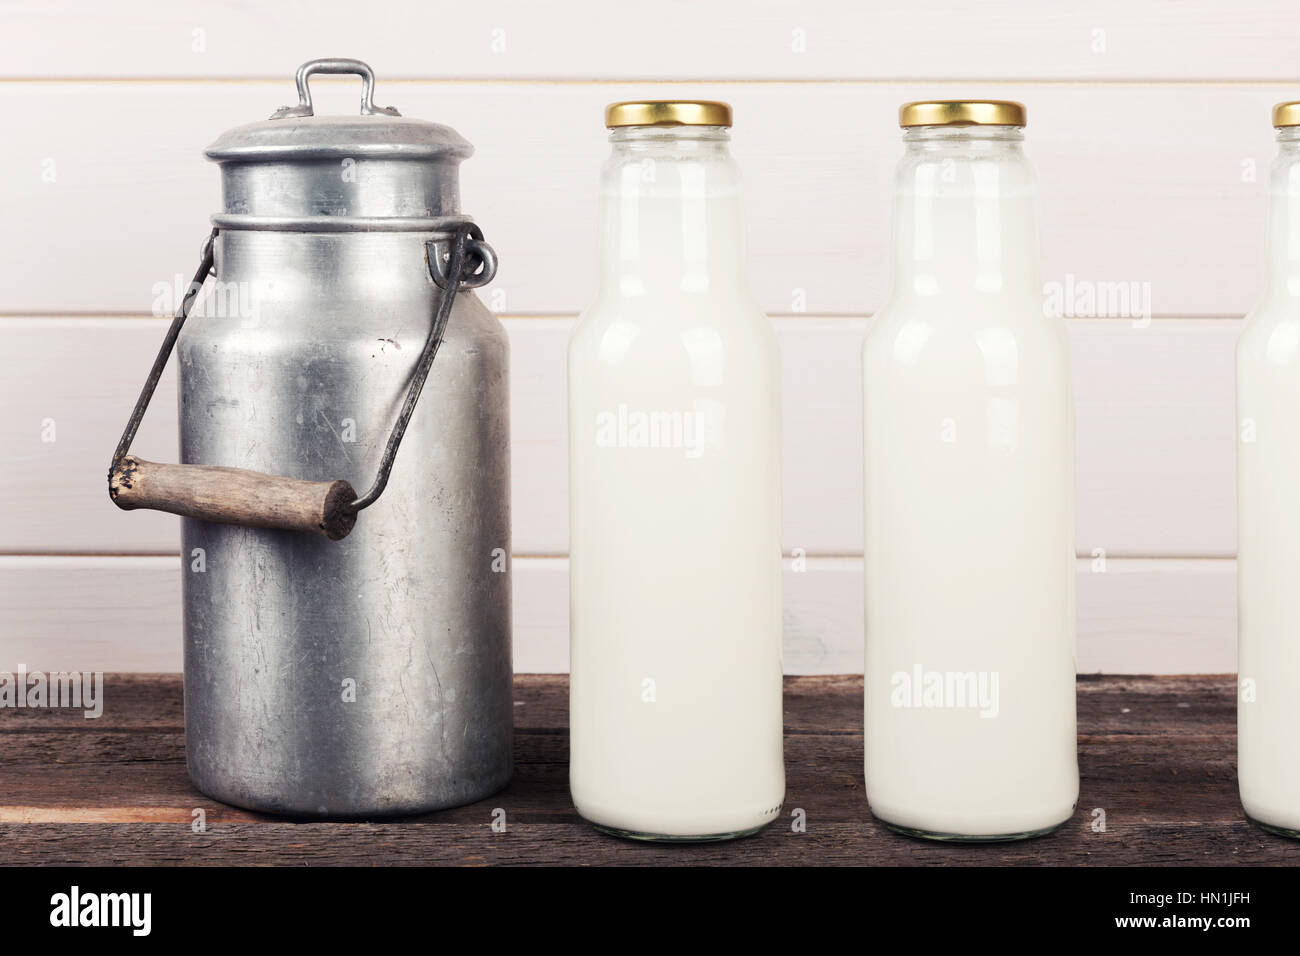 old milk can and bottles on wooden table Stock Photo